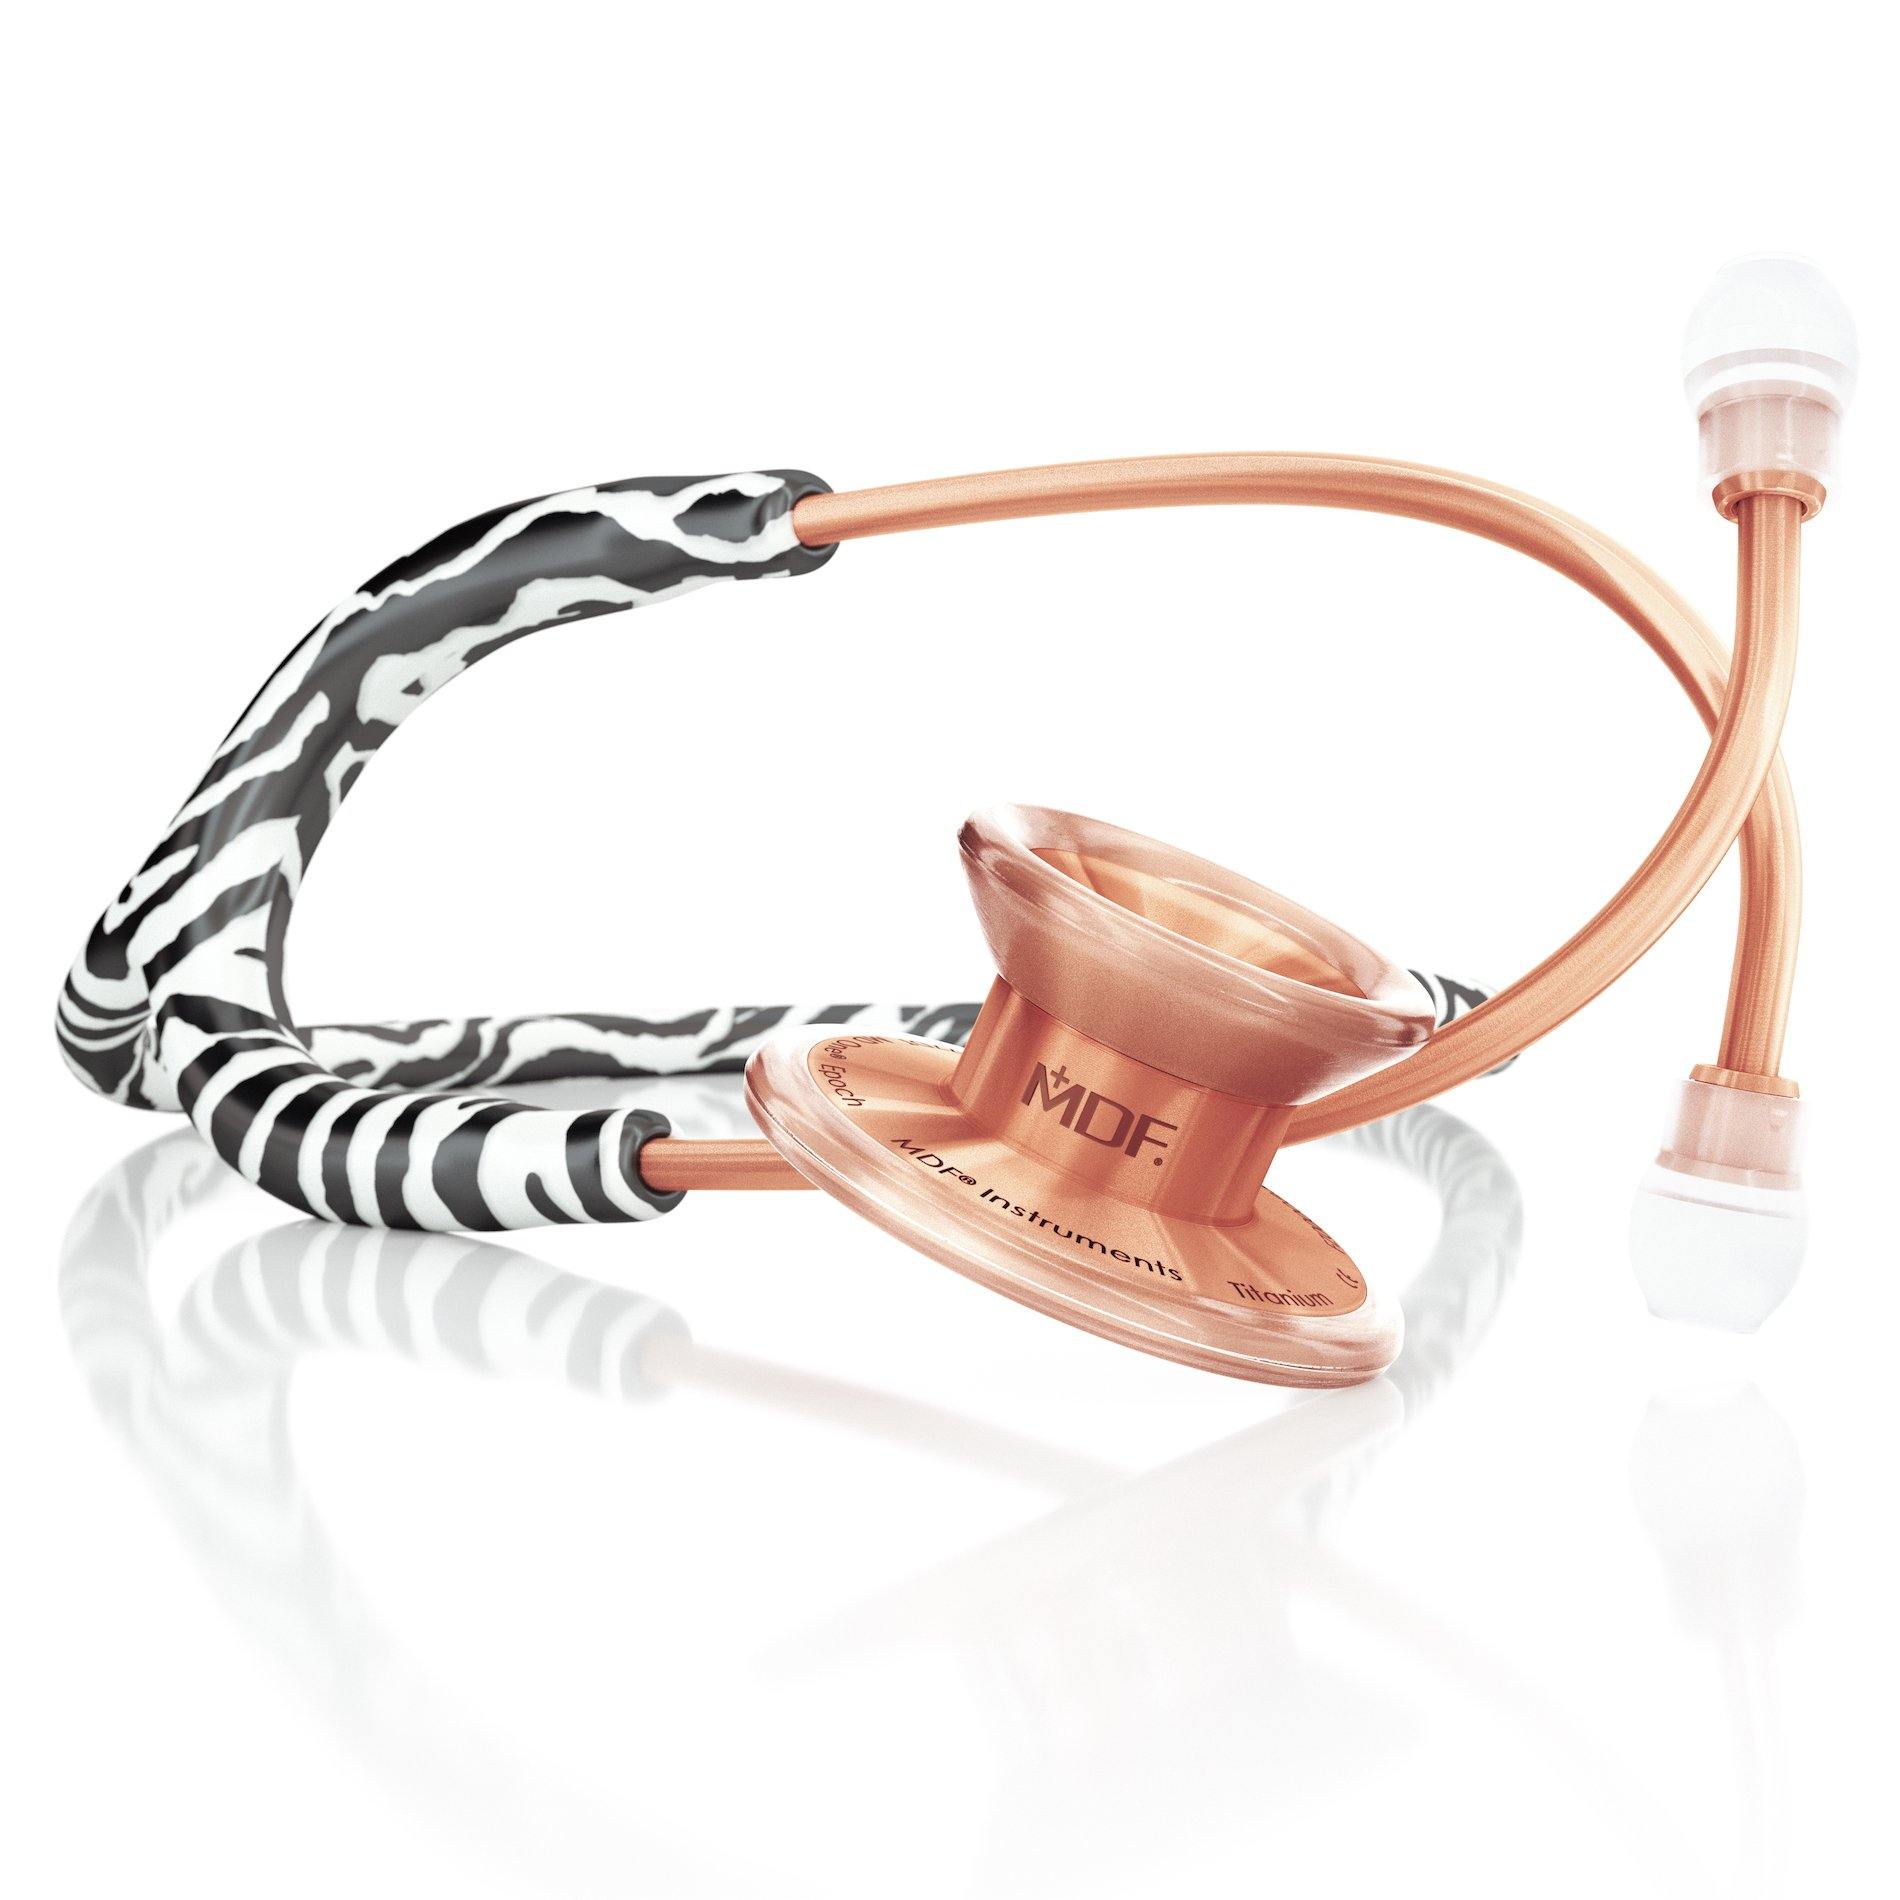 MD One® Epoch® Titanium Adult Stethoscope - Zebra/Rose Gold - MDF Instruments Official Store - No - Stethoscope